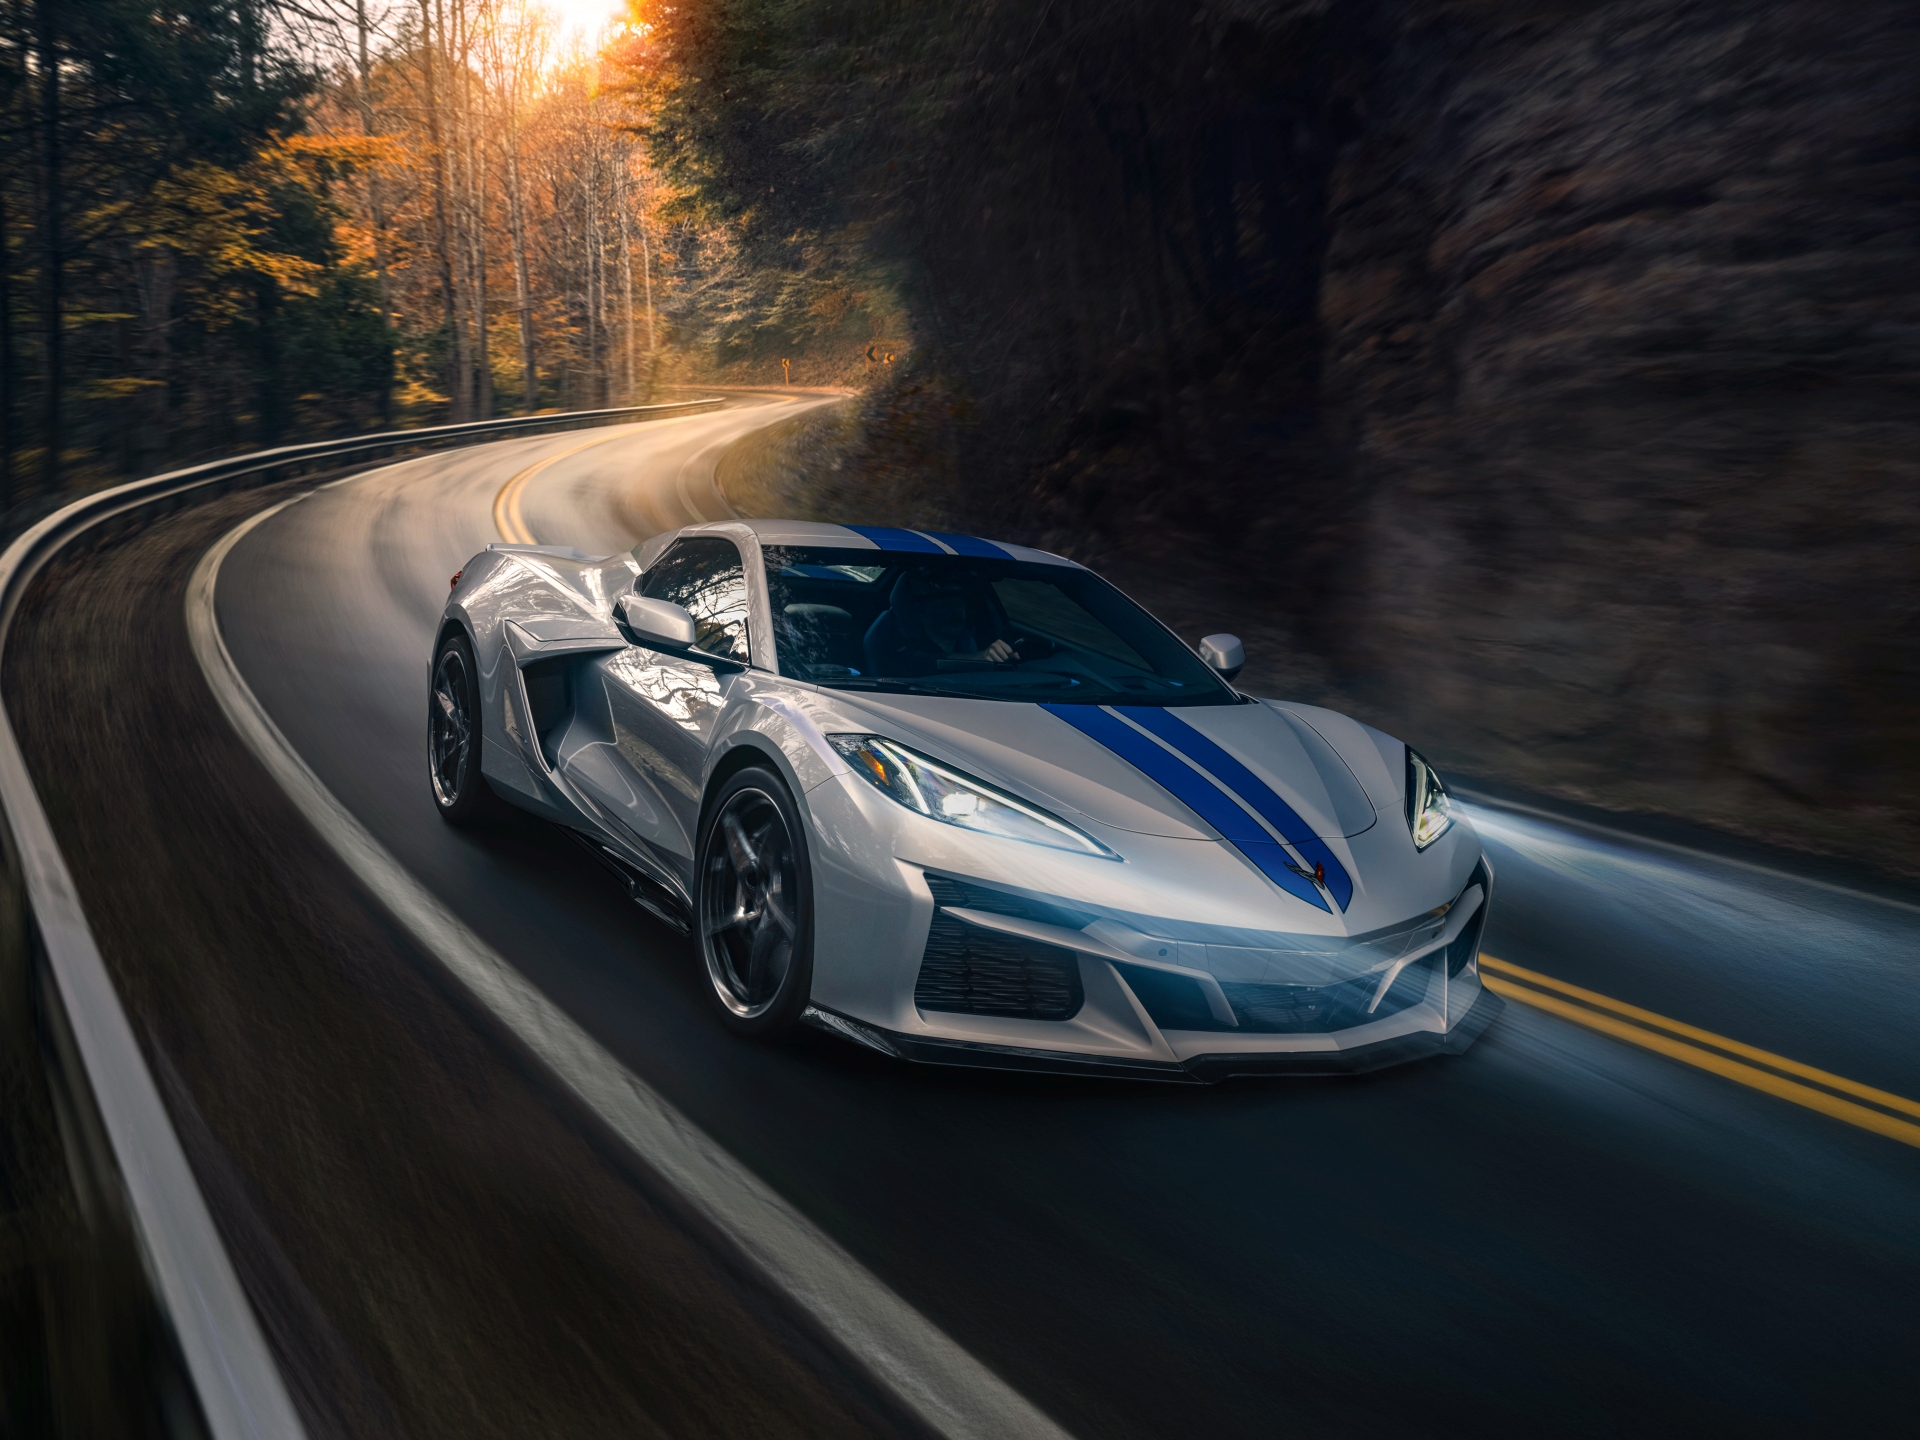 Passenger side front 3/4 view of 2024 Chevrolet Corvette E-Ray 3LZ convertible in Silver Flare with Electric Blue stripe package driving on a curved mountain road. Pre-production model shown. Actual production model may vary. Model year 2024 Corvette E-Ray available 2023.